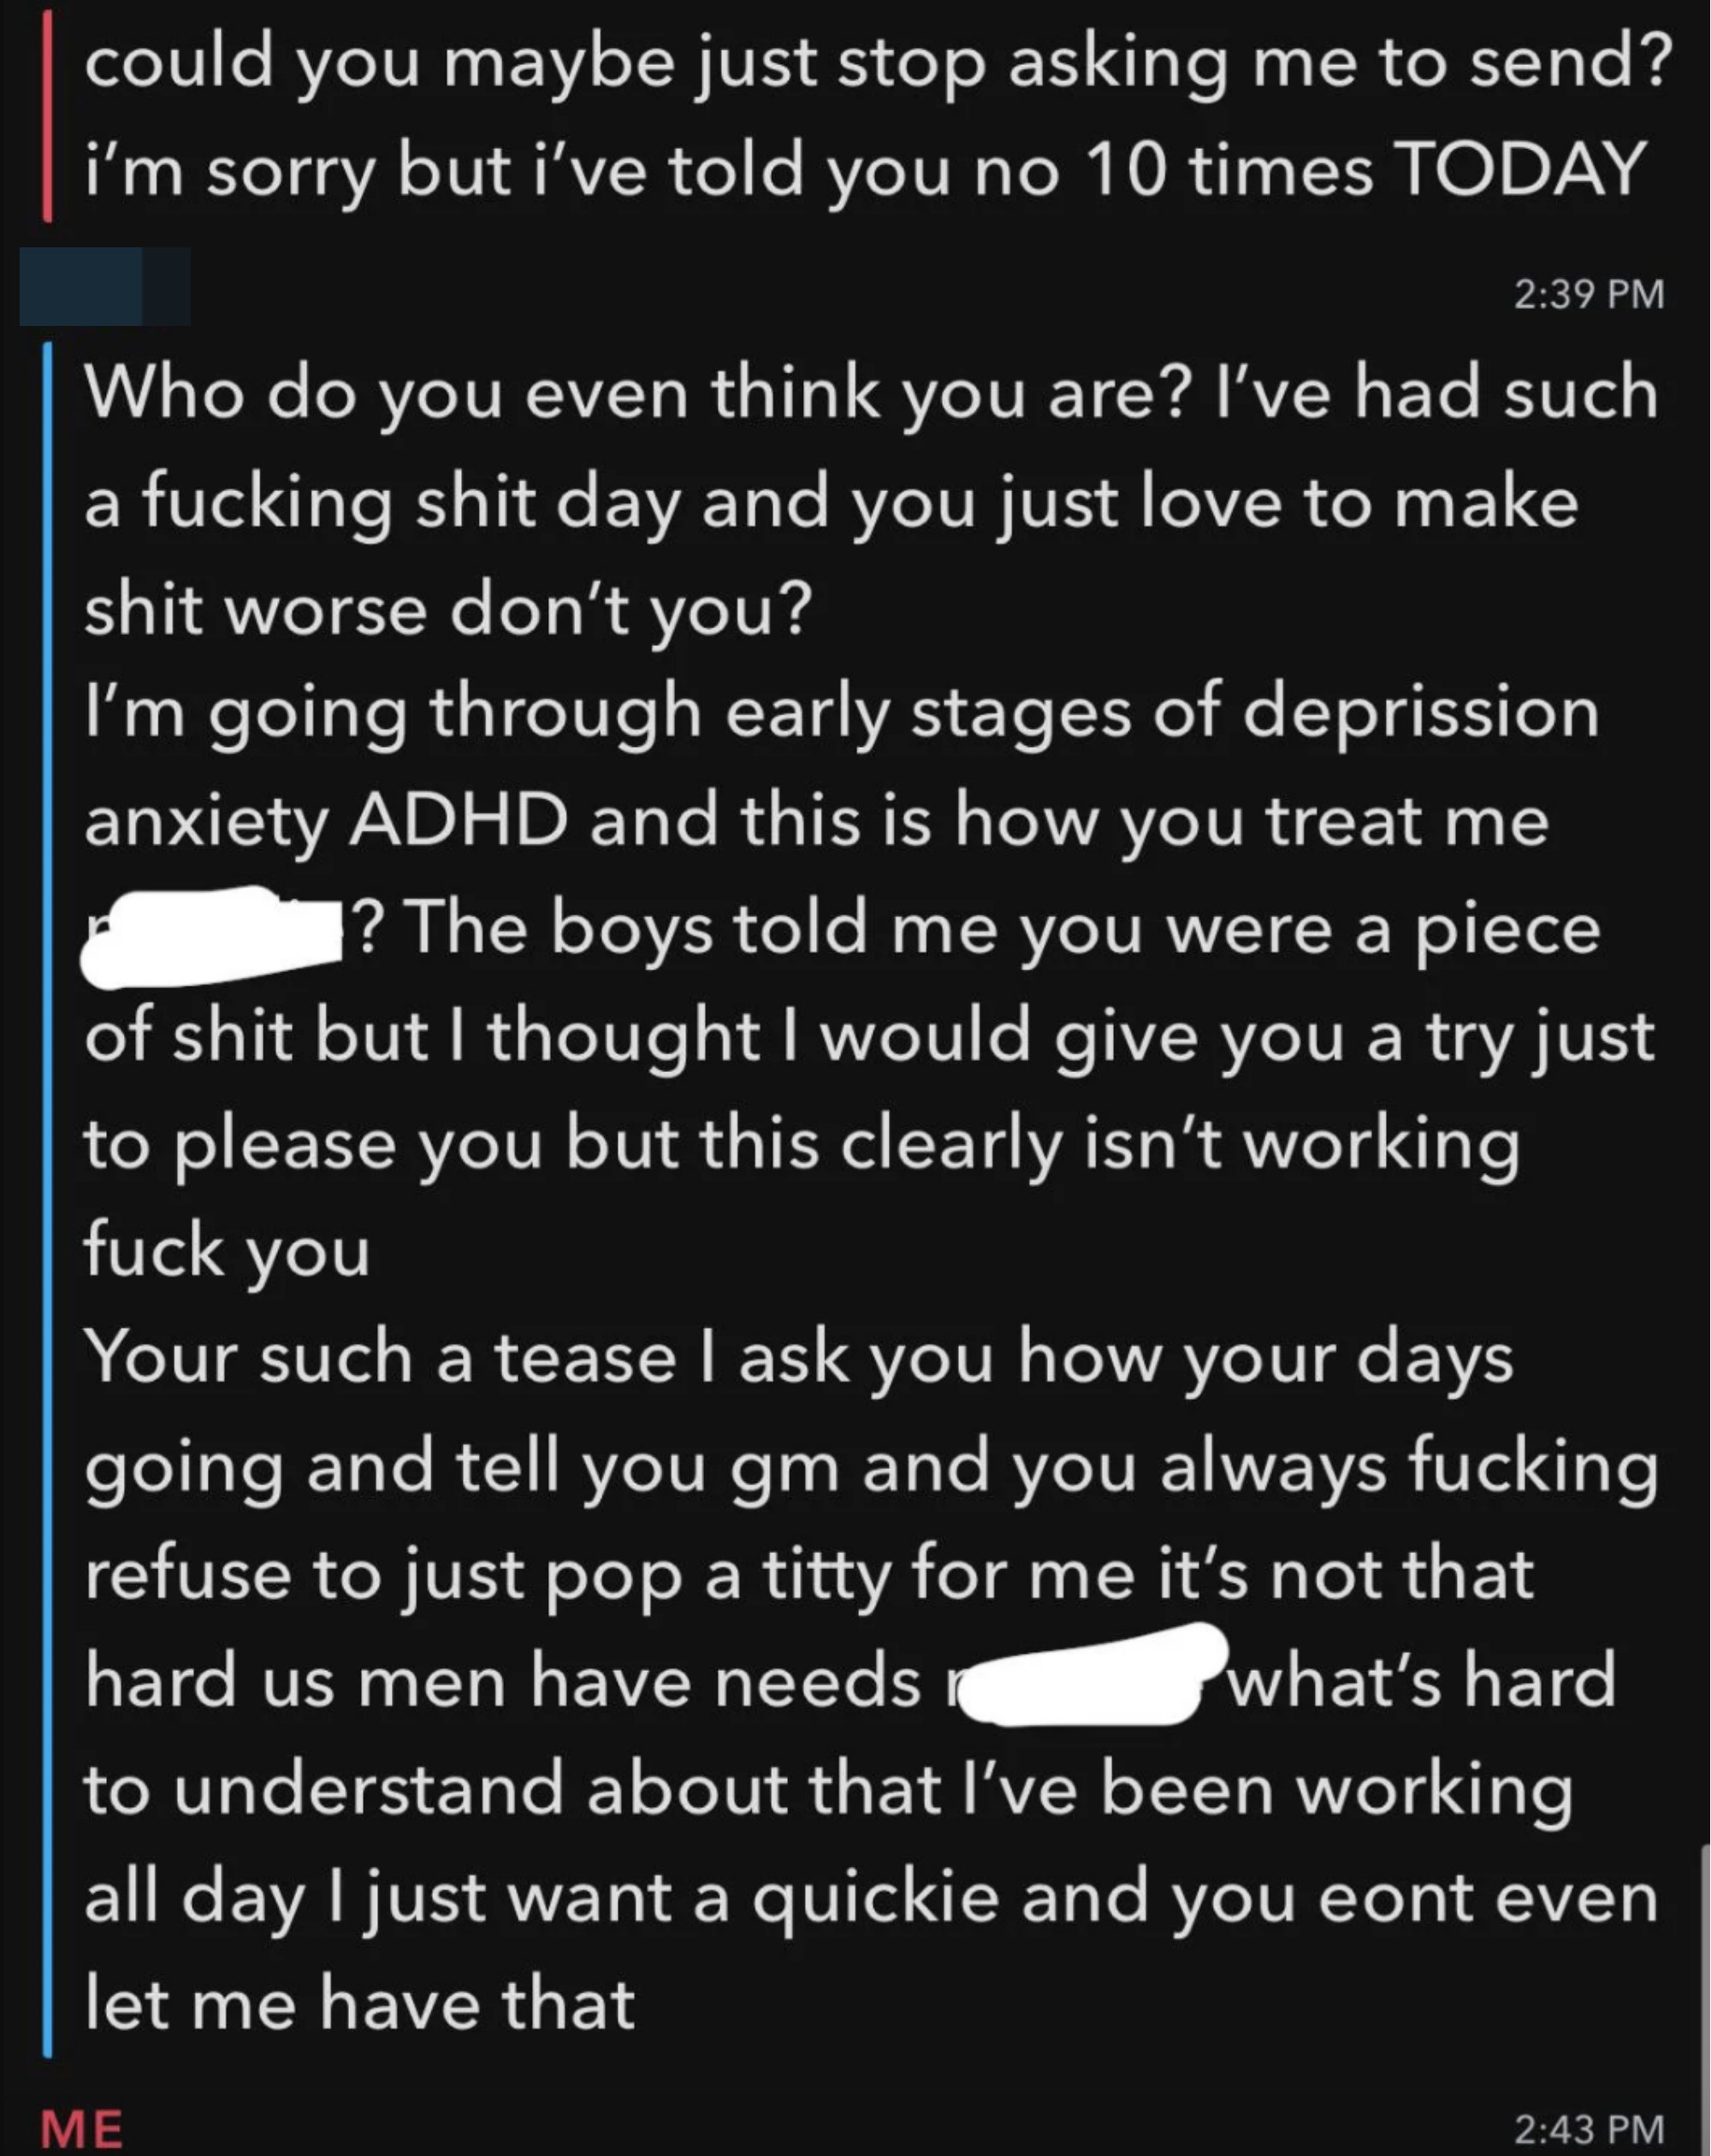 A woman asks a man to stop asking her to send pictures, and he responds with a long and angry rant about how he&#x27;s had a bad day and she&#x27;s being shitty by not &quot;popping a titty&quot; for him